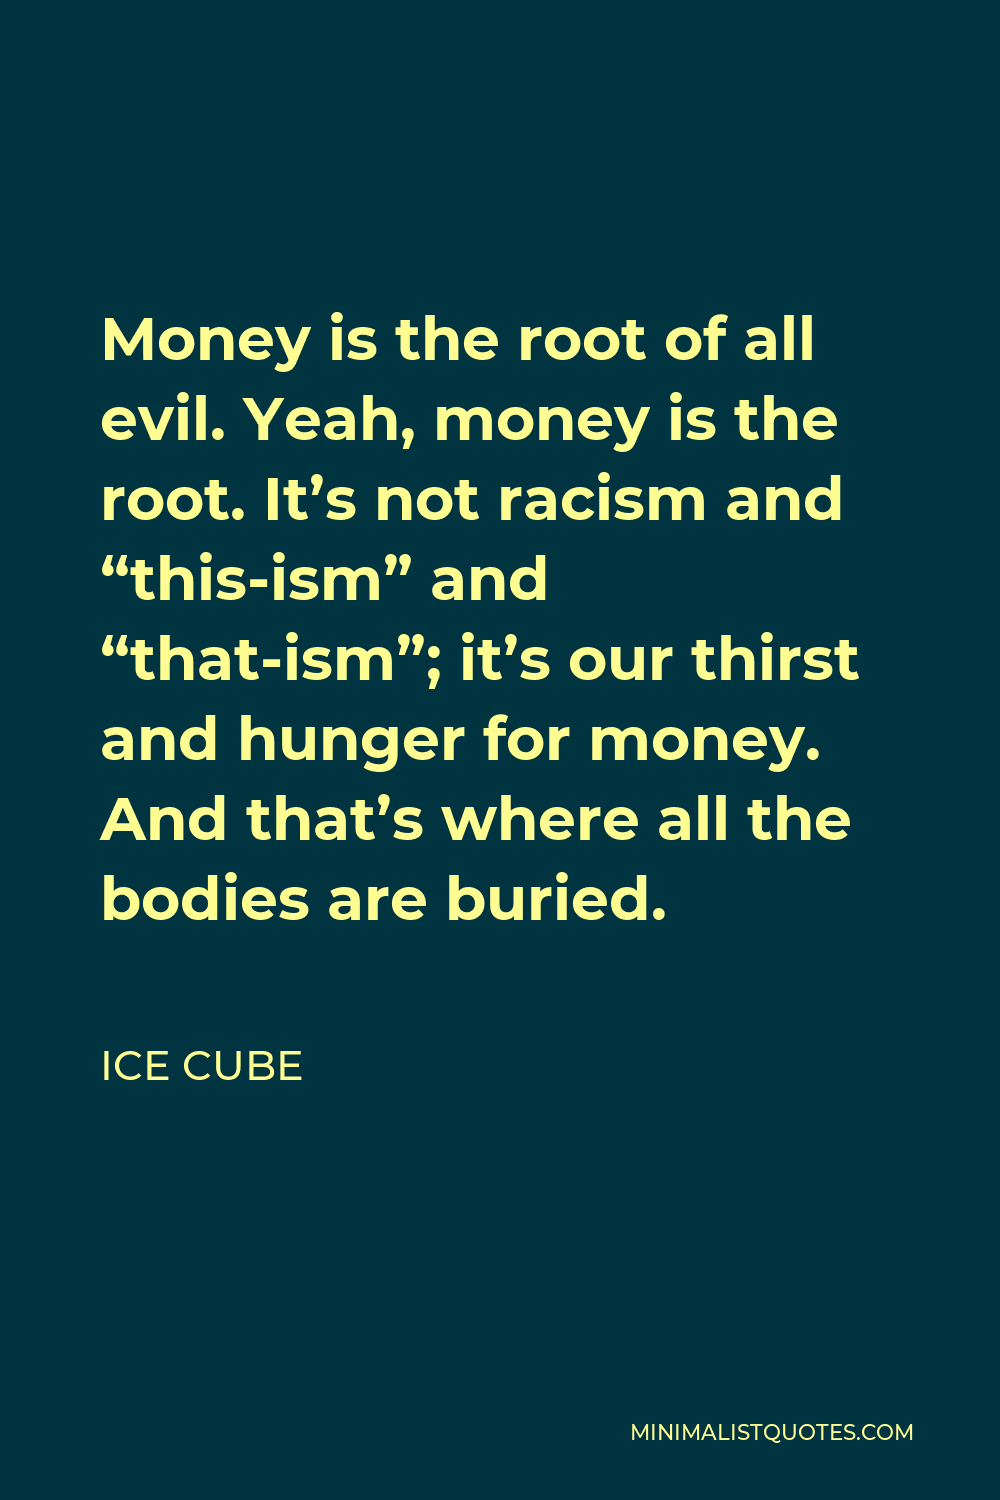 Ice Cube Quote - Money is the root of all evil. Yeah, money is the root. It’s not racism and “this-ism” and “that-ism”; it’s our thirst and hunger for money. And that’s where all the bodies are buried.